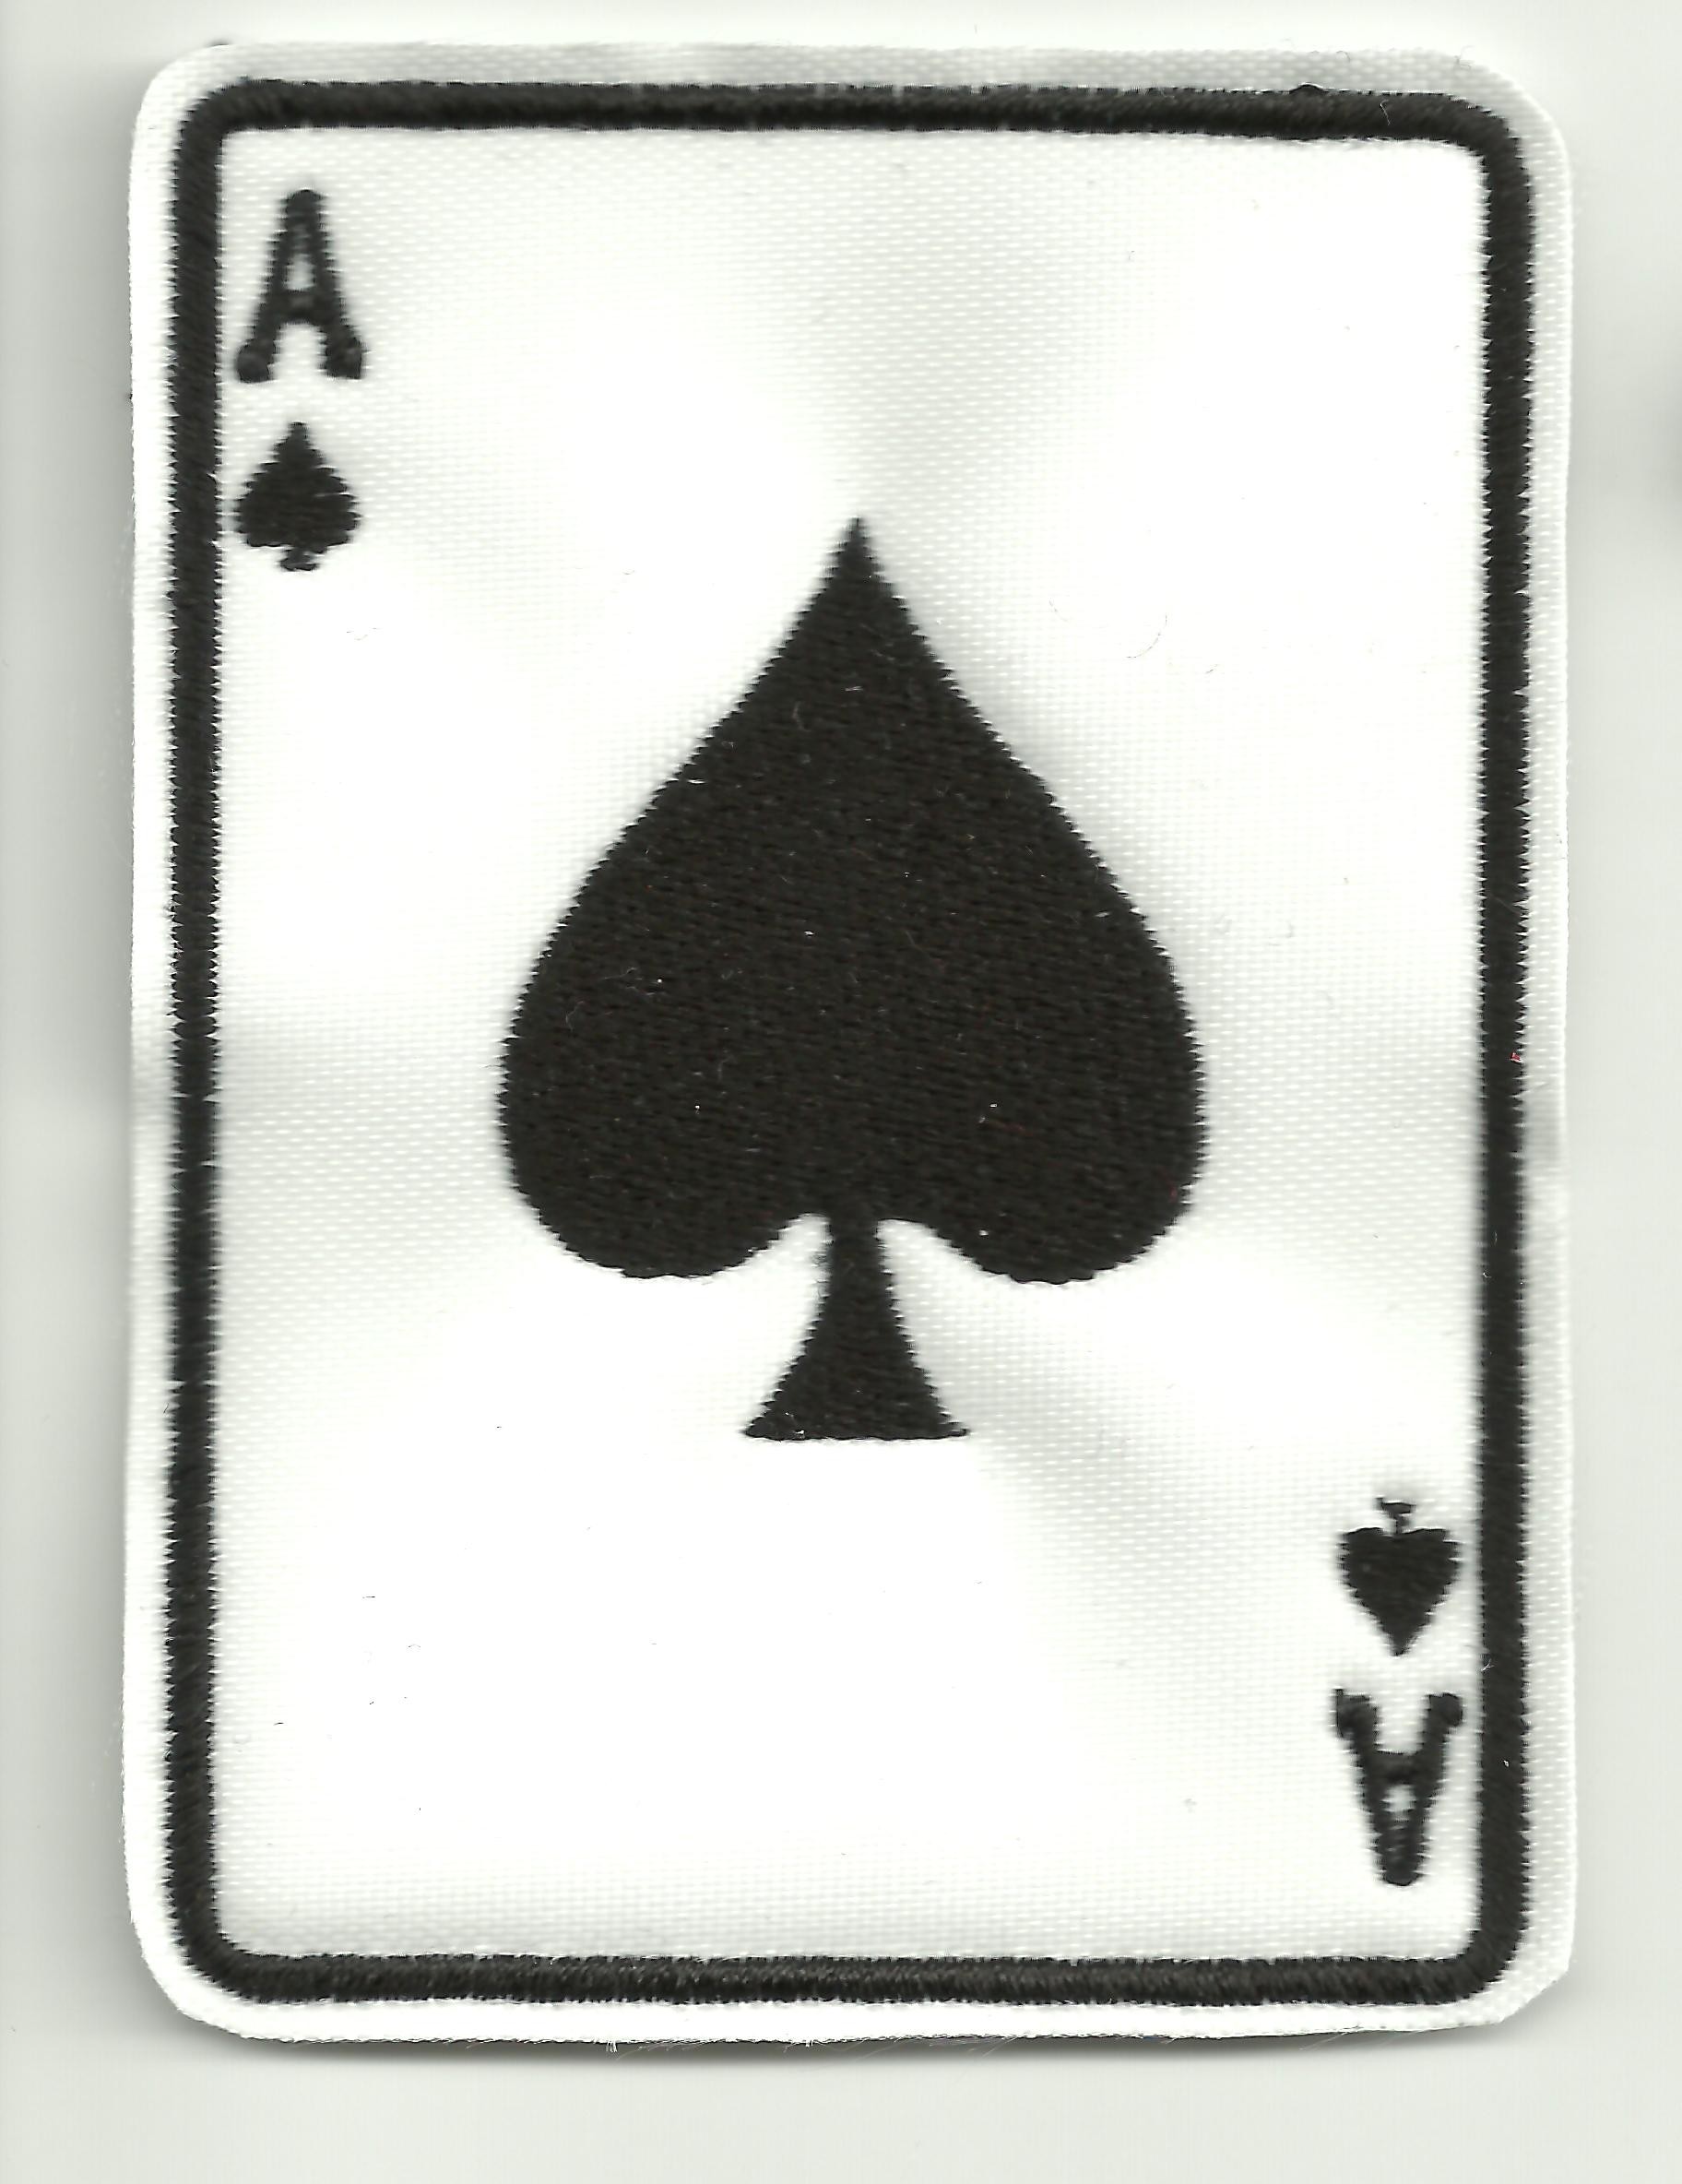 7 X 5 cm embroidered patch Ace of spades